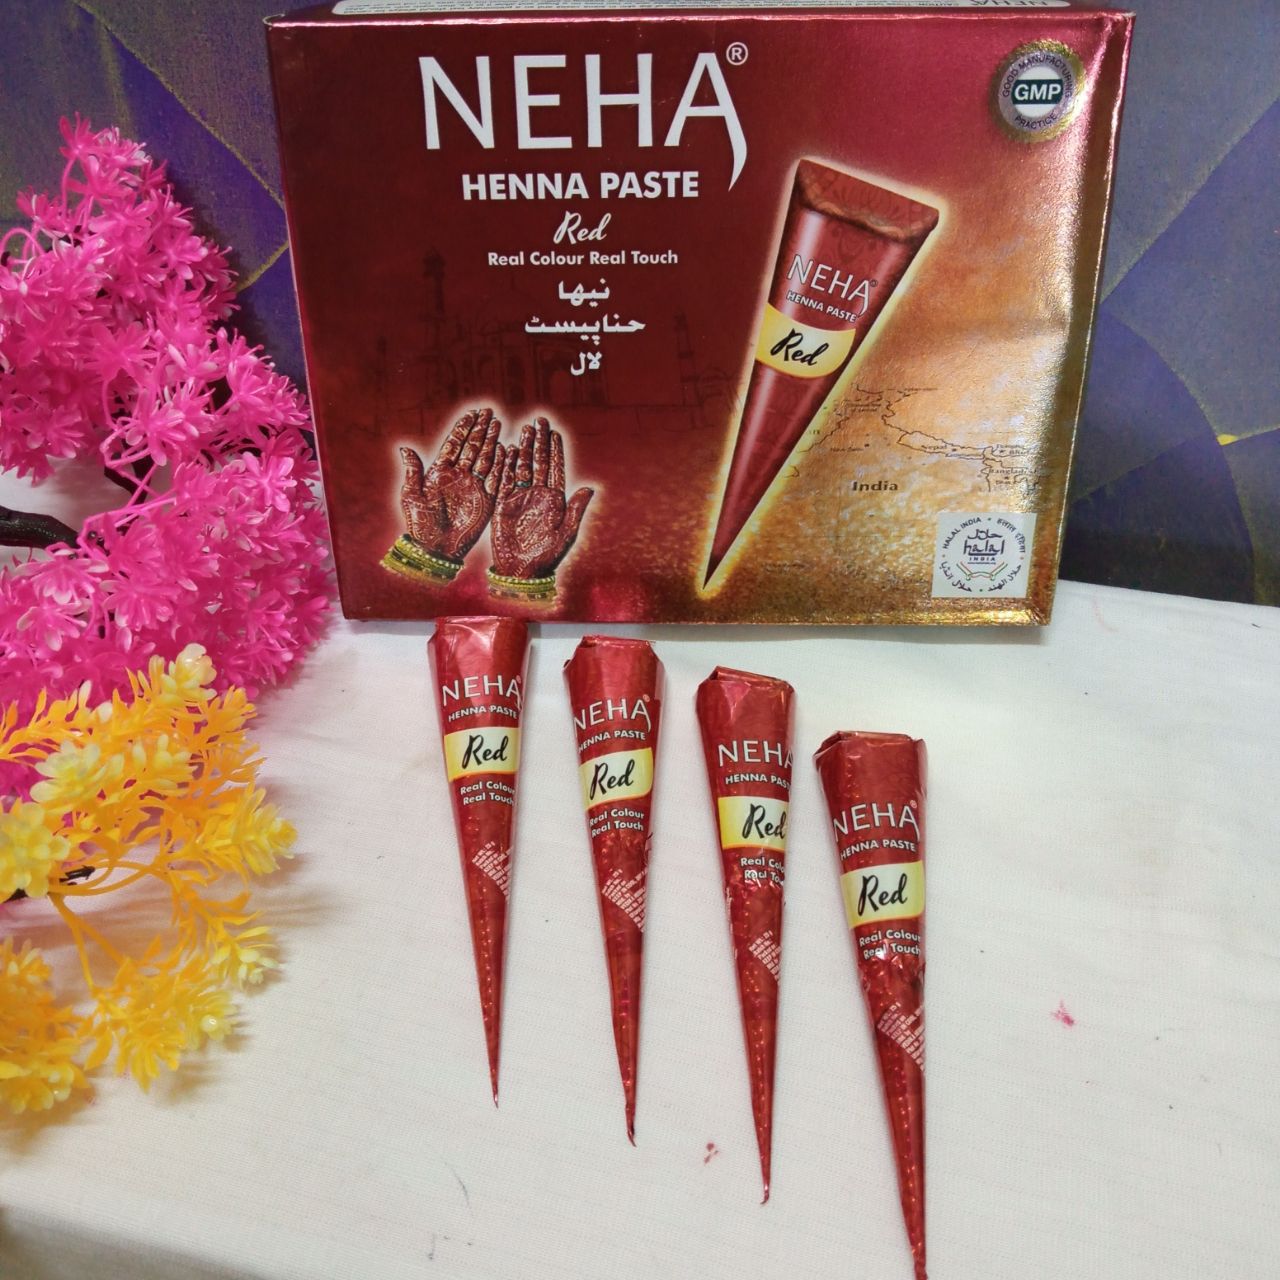 ini adalah Henna Red, color: Red, brand: Neha, age_group: all ages, gender: female